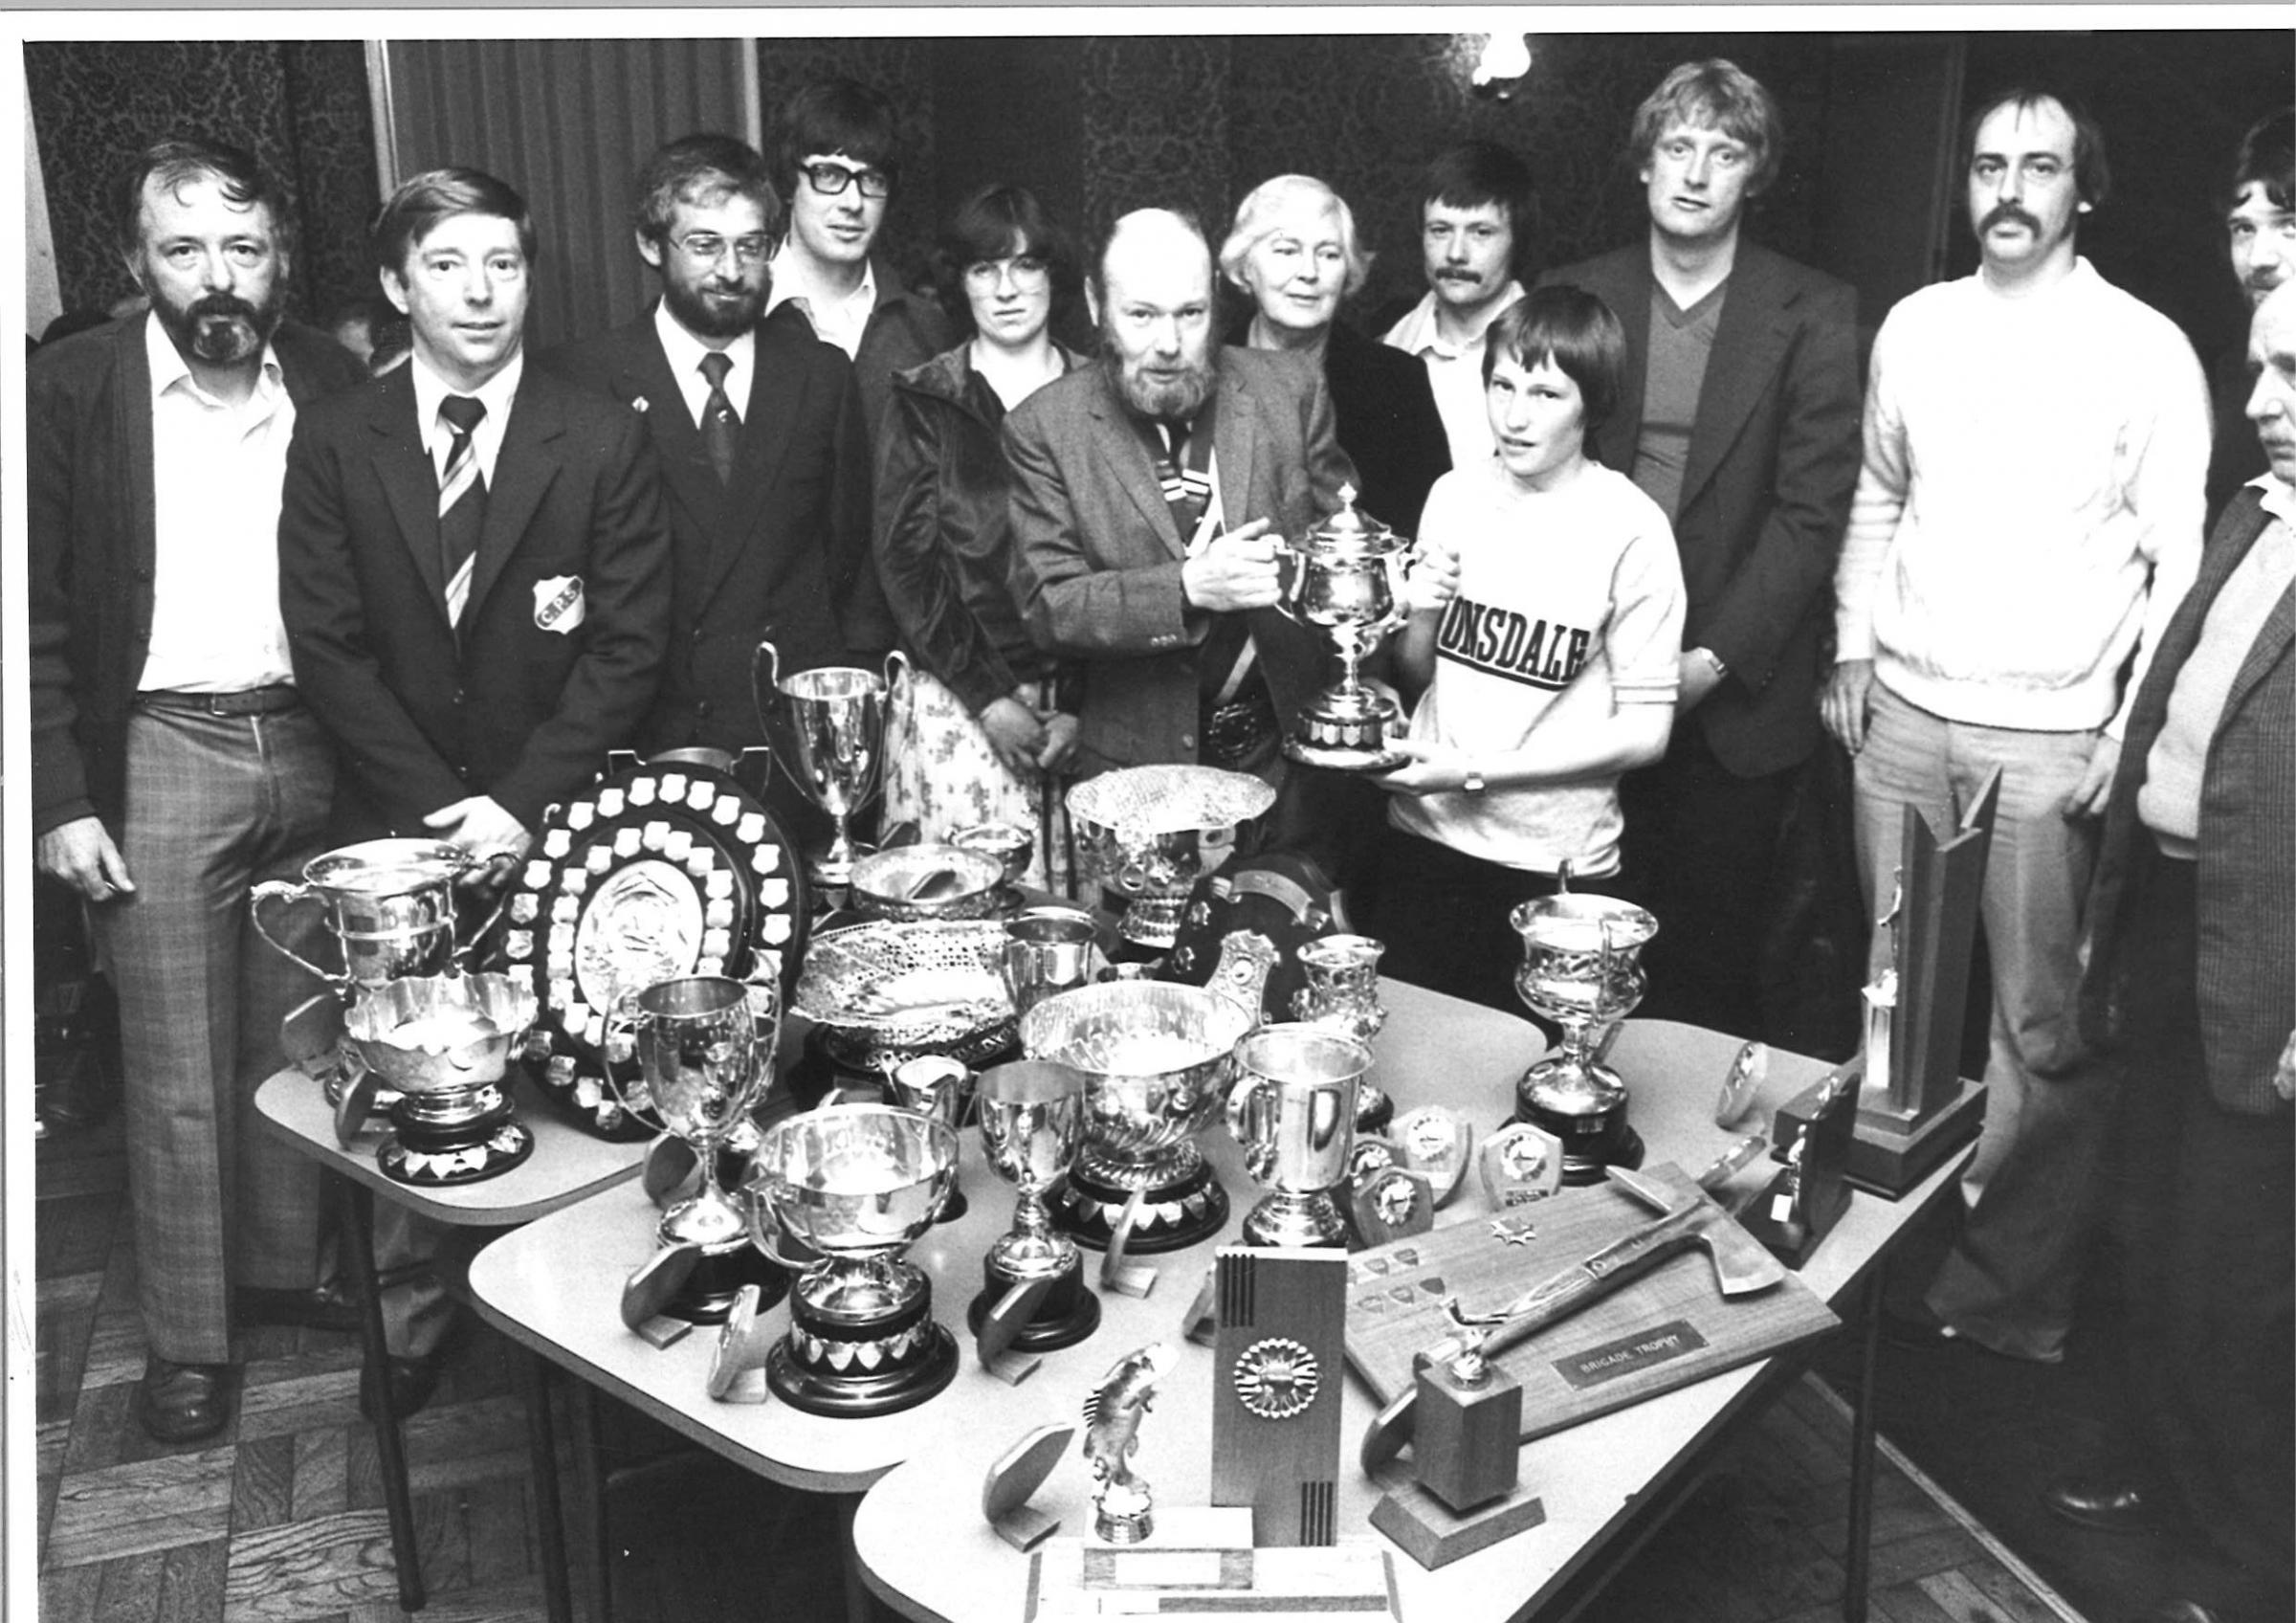 MP 22 Apr 2021 NOSTALGIA old sports pictures BLAST FROM THE PAST Col Piscatorial Society